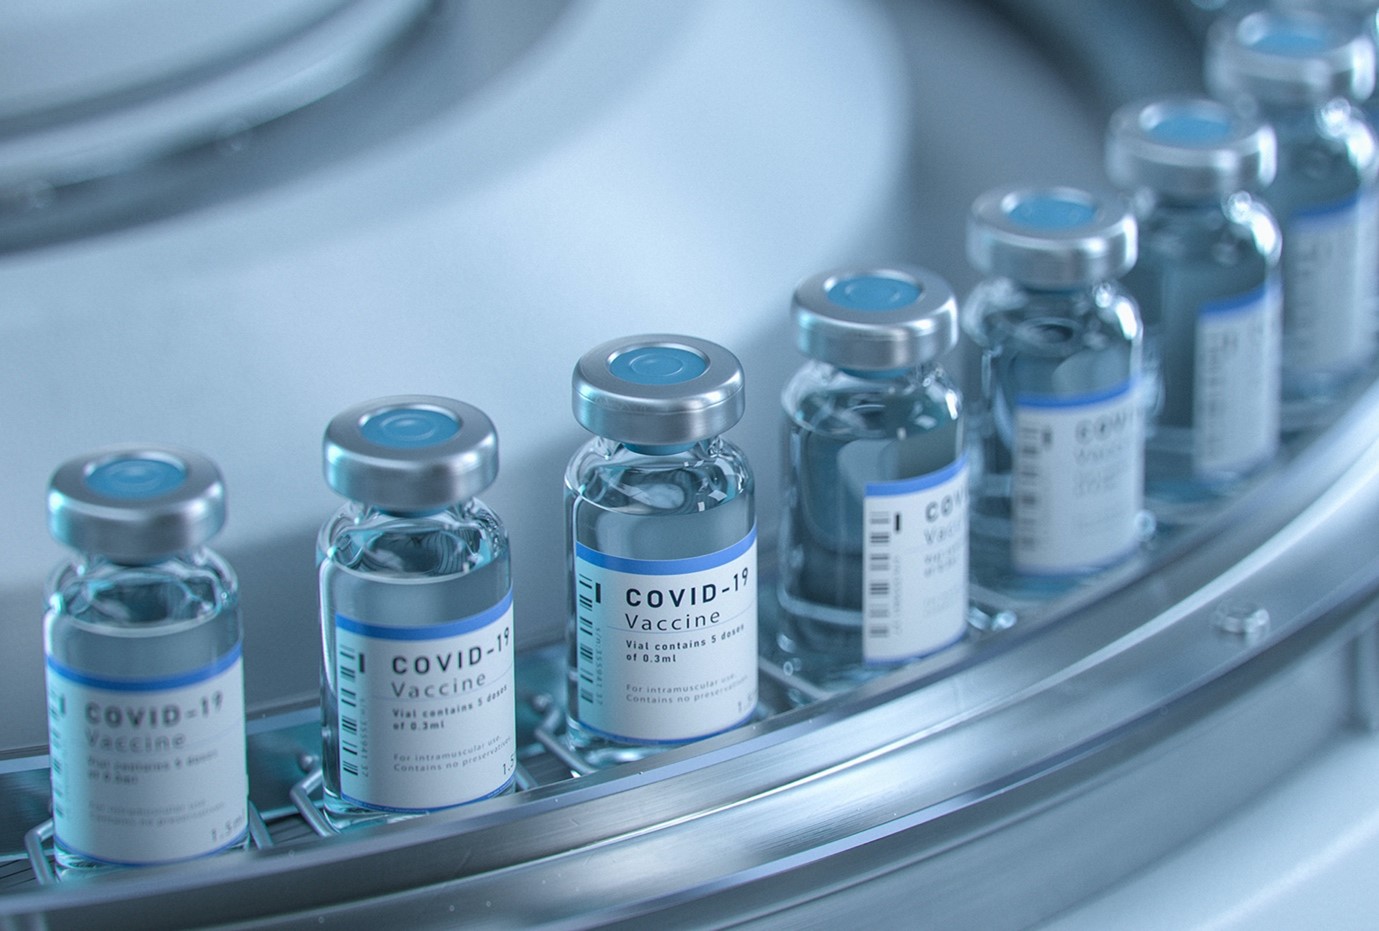 Small glass vaccine ars labelled with "covid"